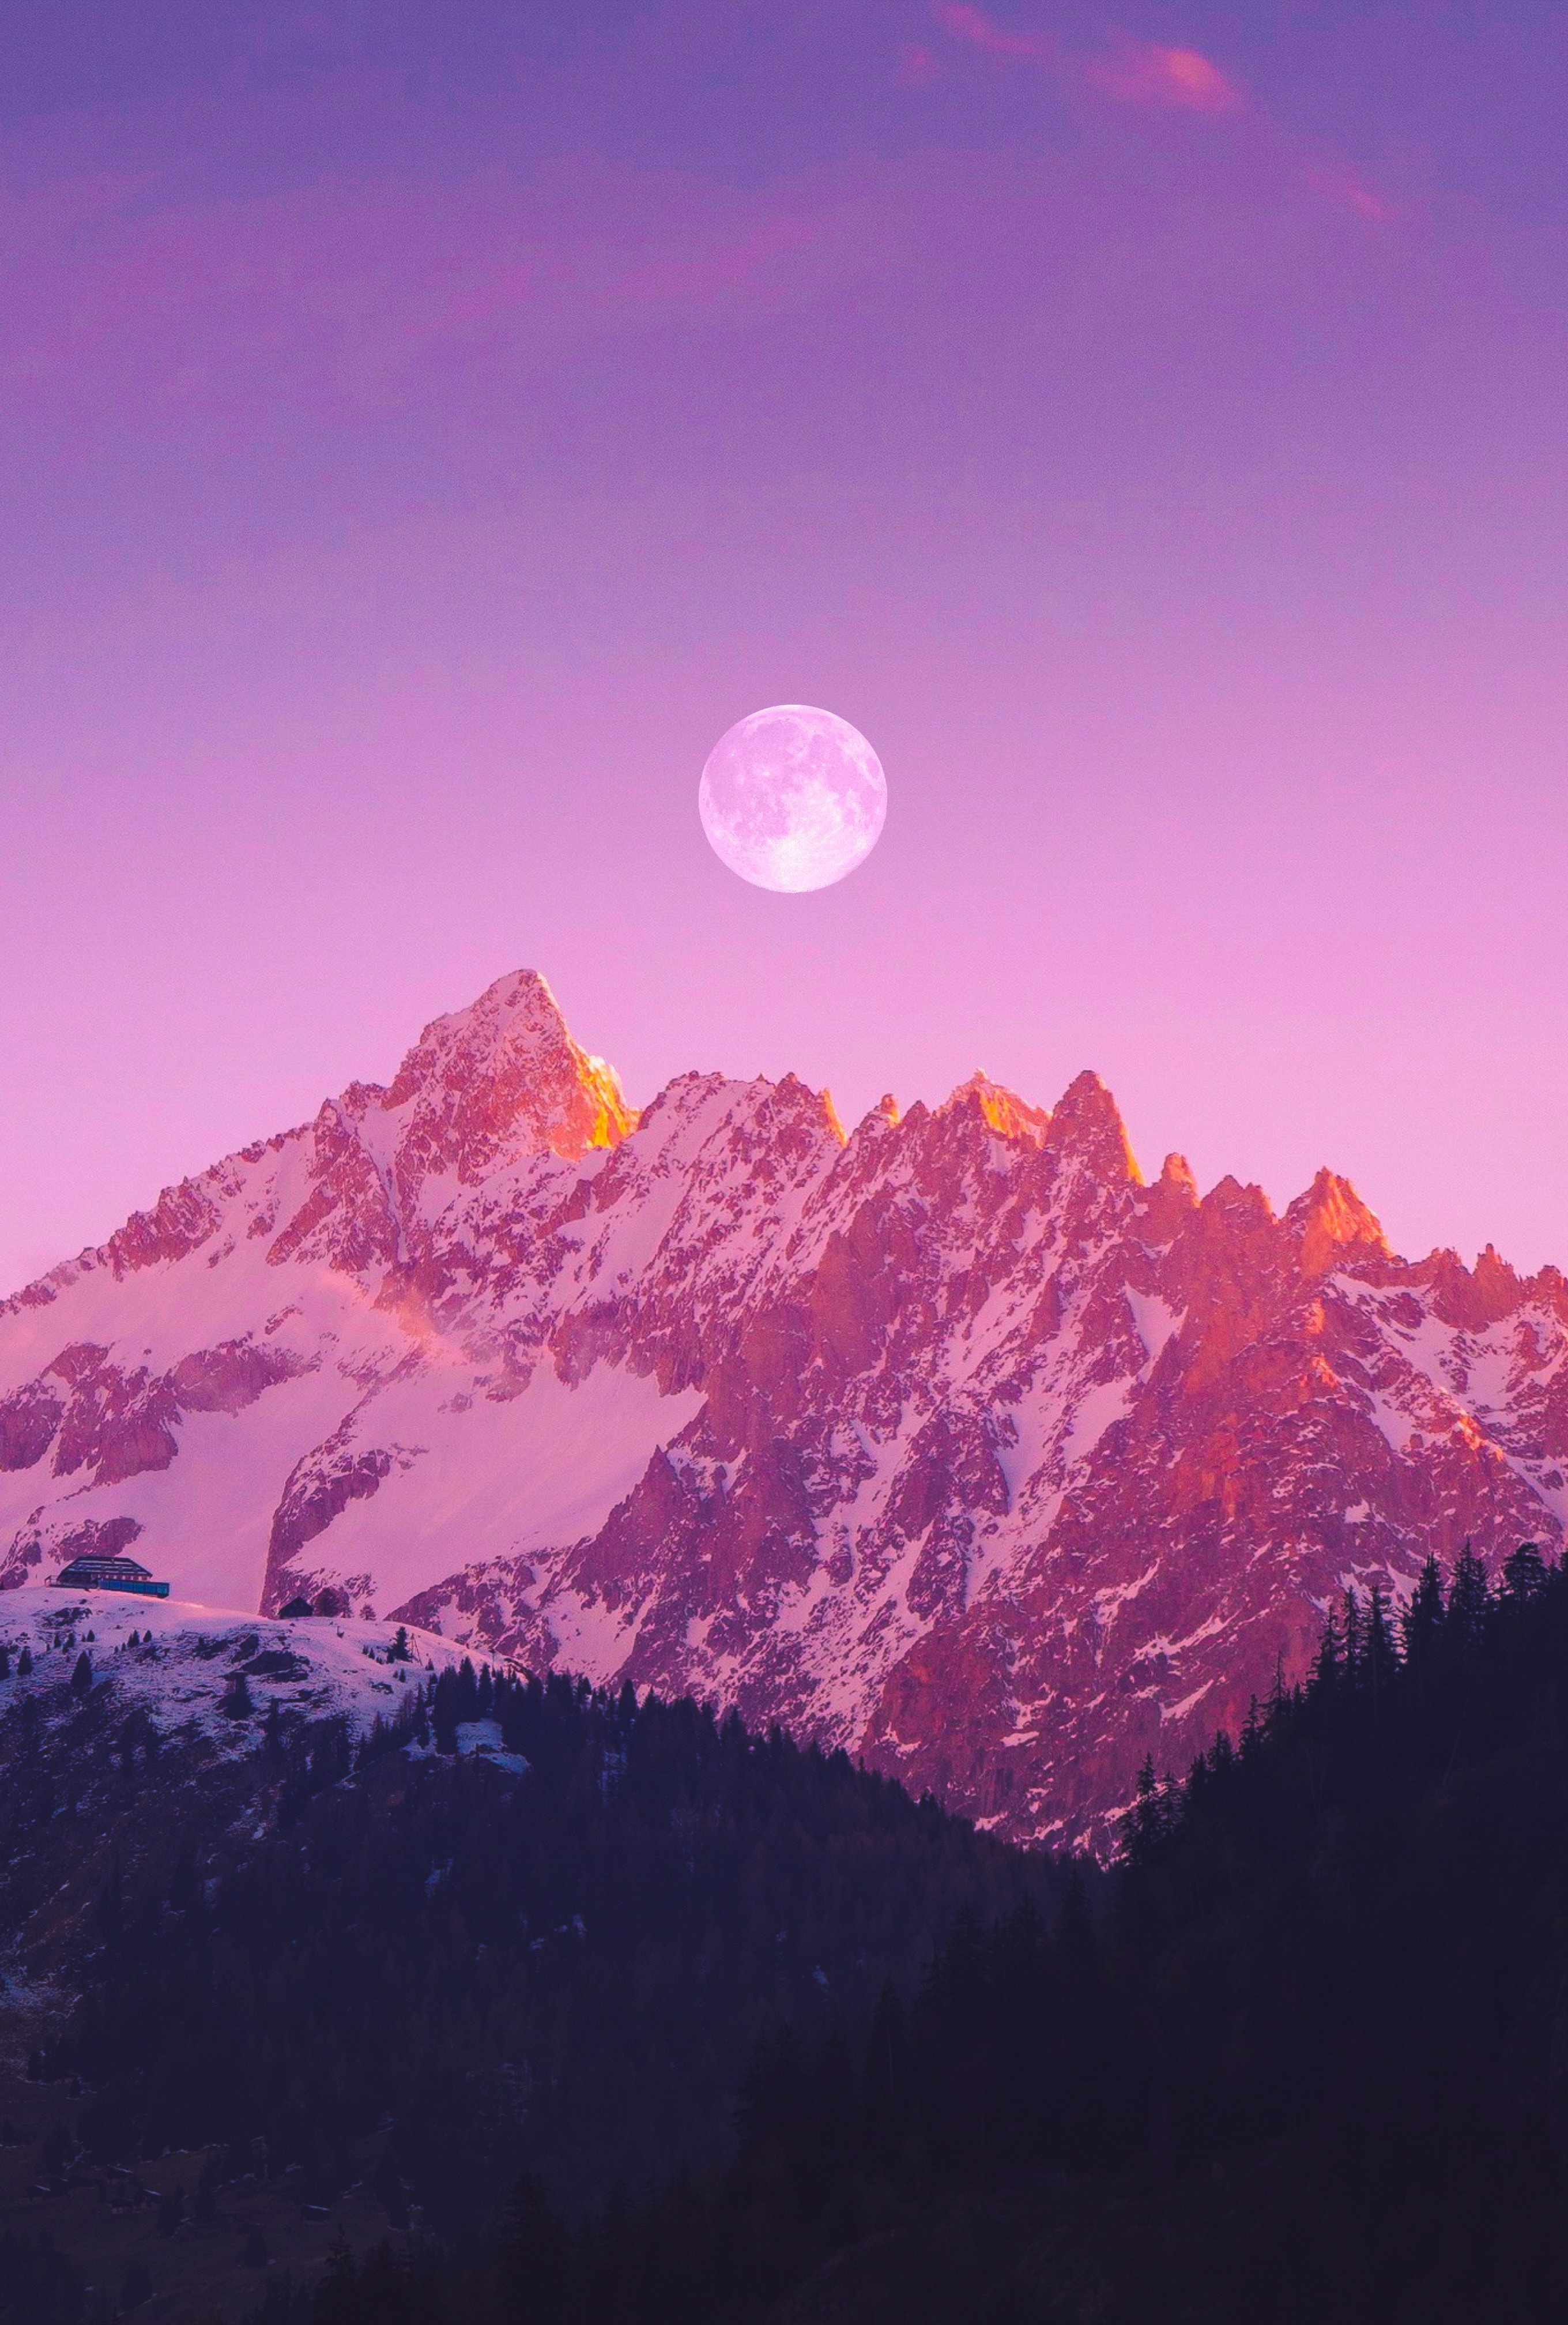 80231 download wallpaper purple, landscape, nature, mountains, night, moon, violet screensavers and pictures for free